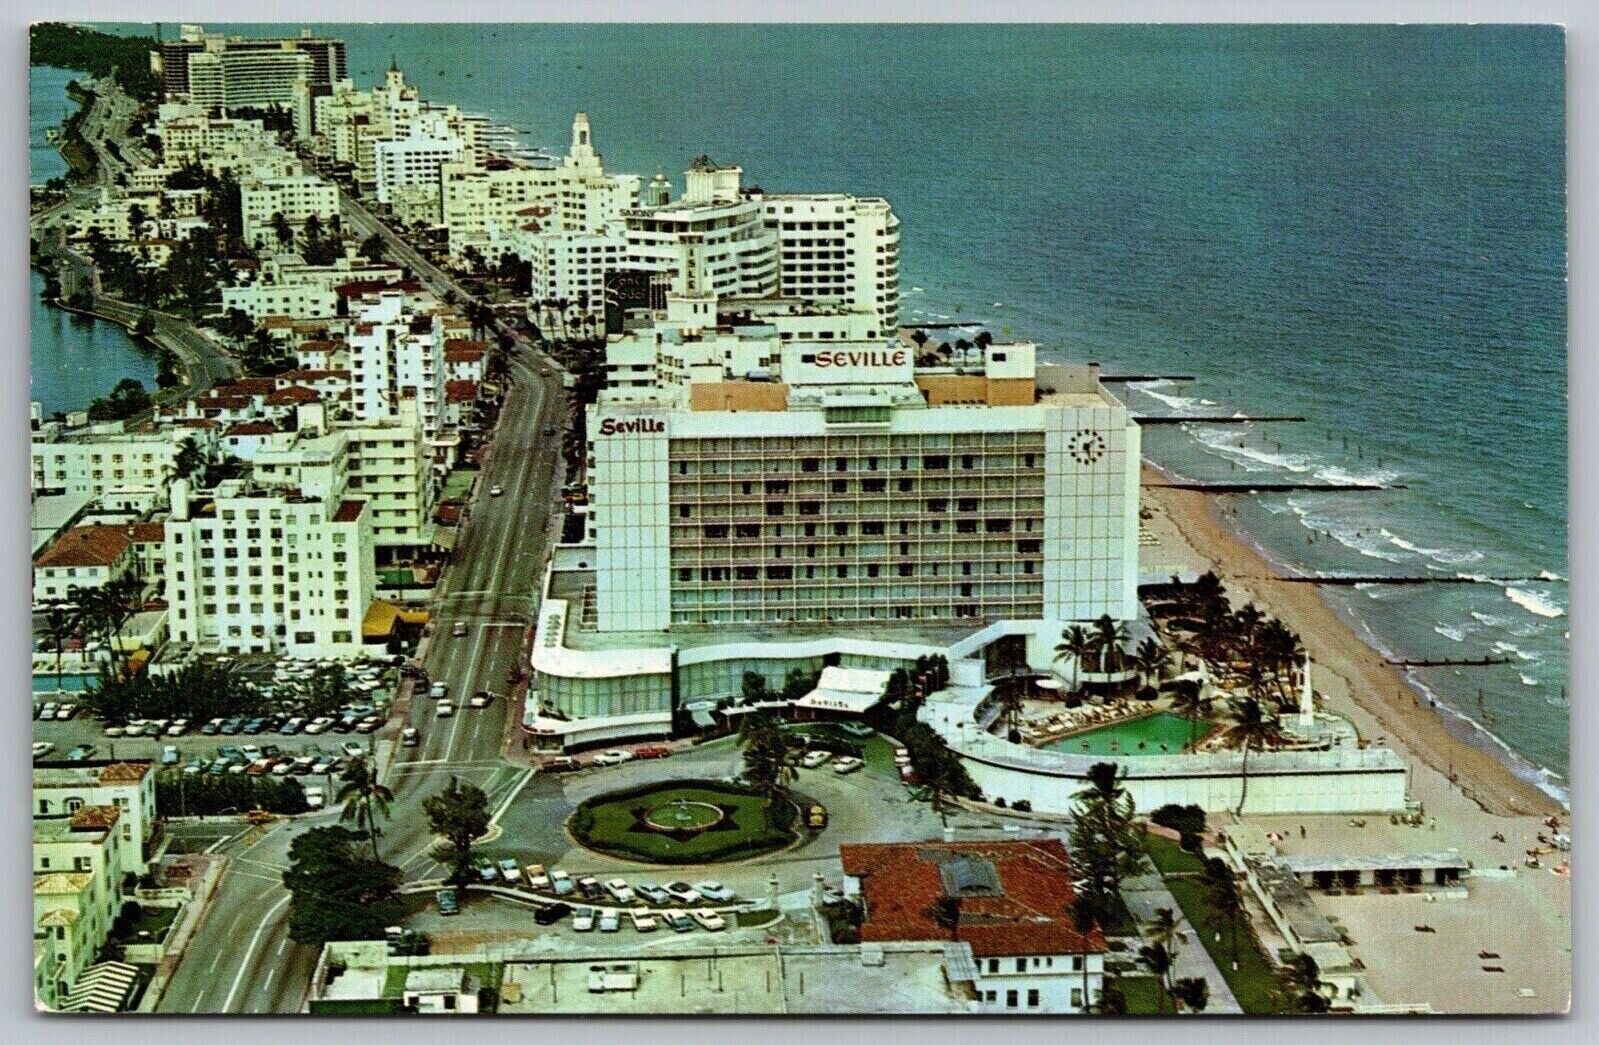 Seville Hotel Oceanfront Hotel Row Miami Beach Florida Aerial View VNG Postcard